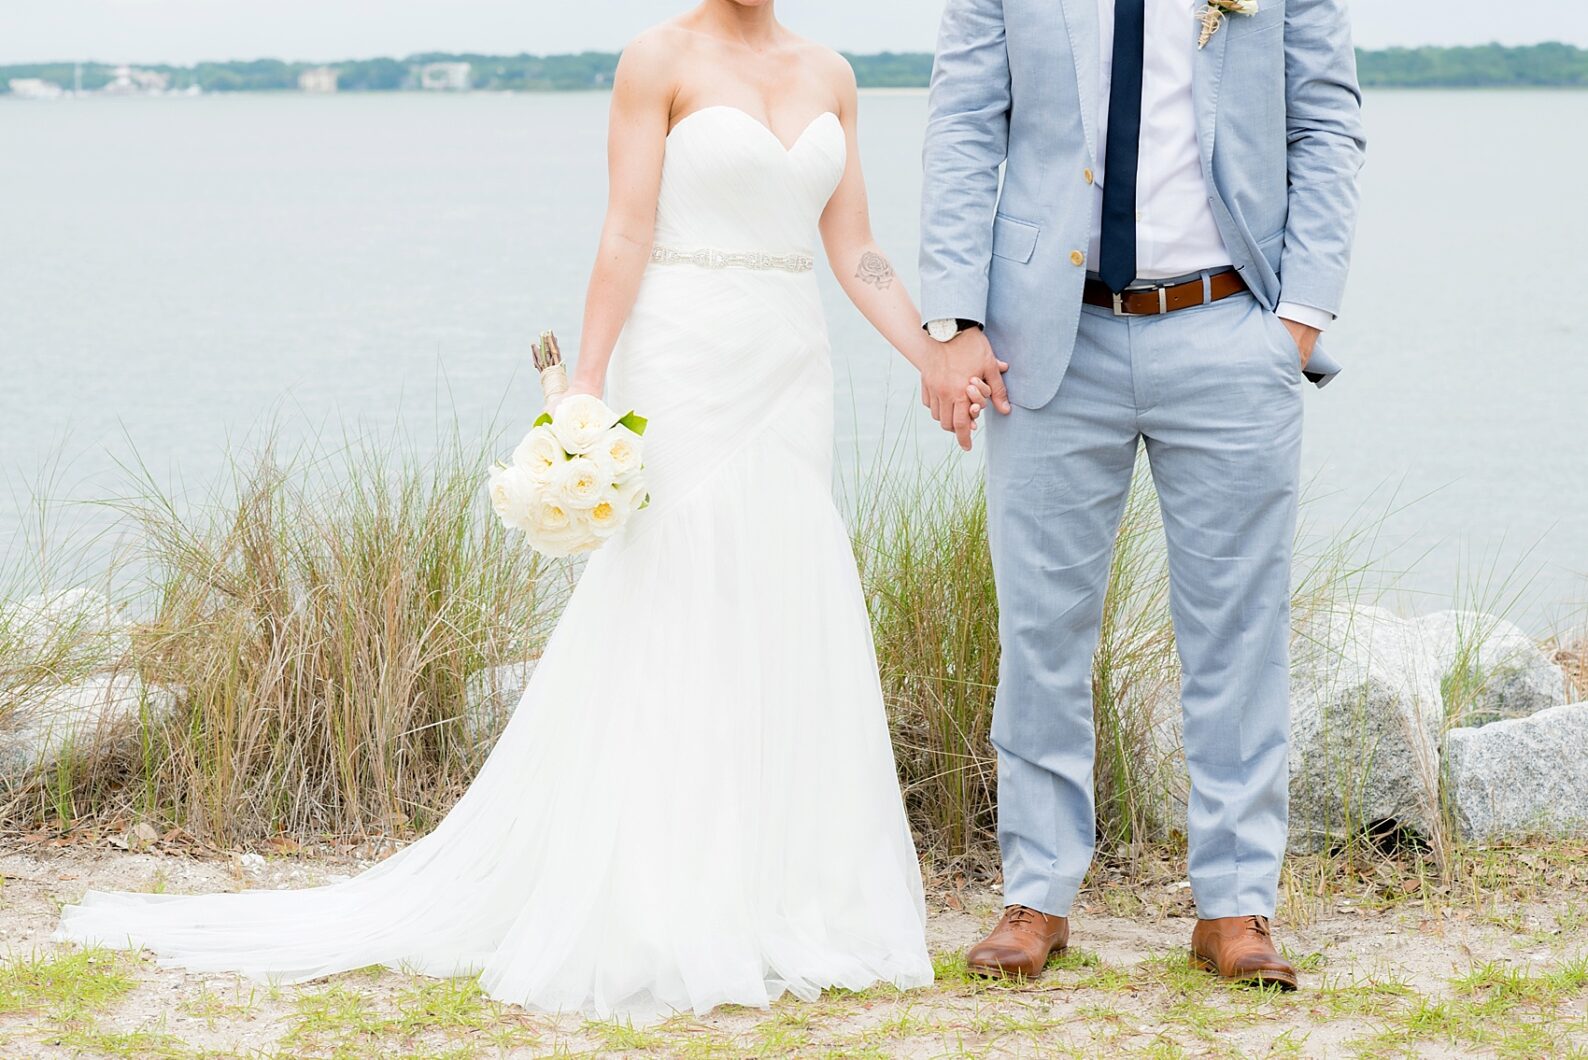 Bride and groom waterfront photos in Haig Point, South Carolina, off the coast of Hilton Head. Photos by Mikkel Paige Photography.